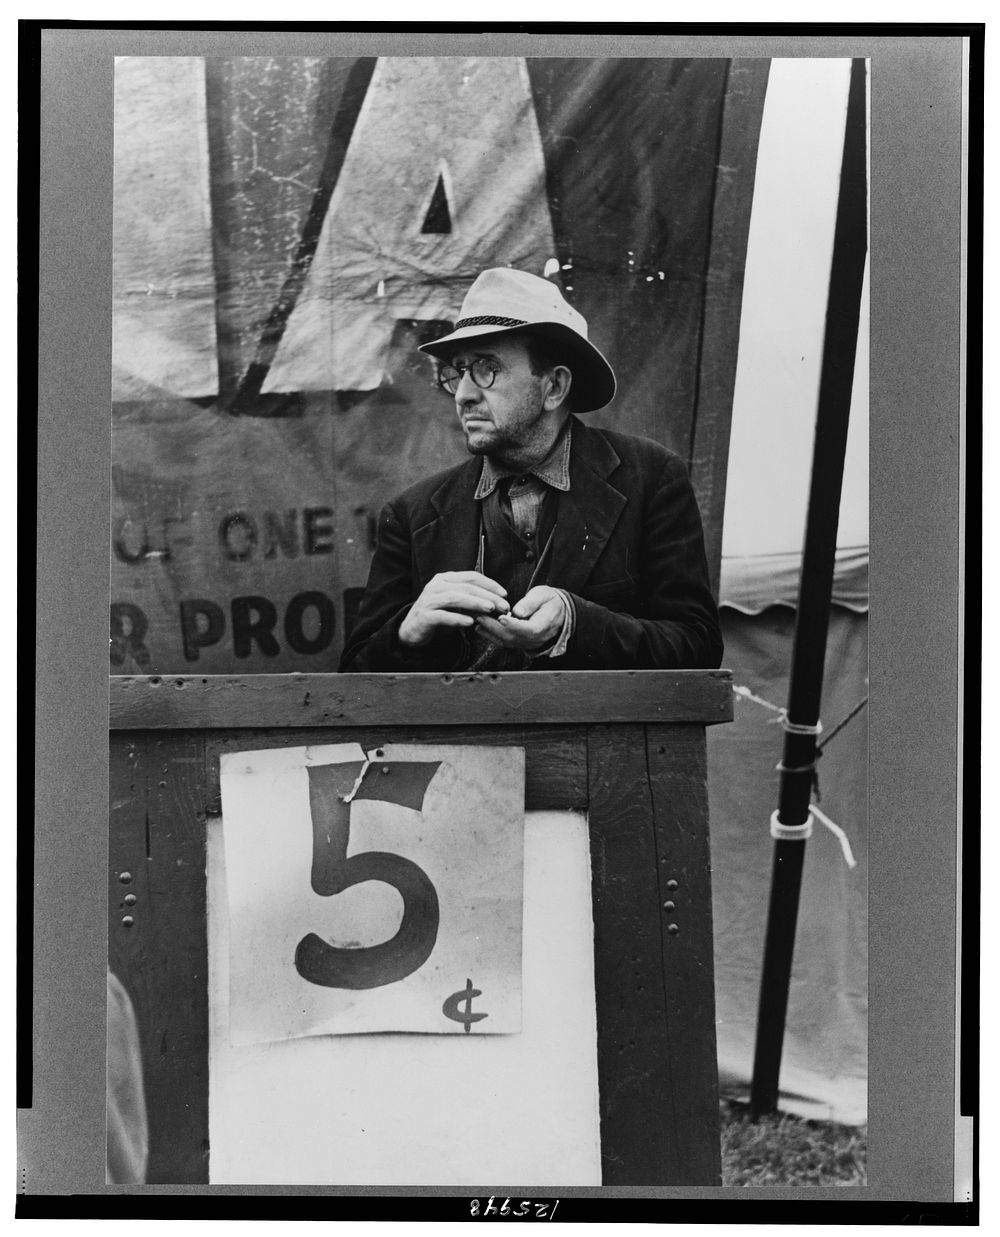 Ticket seller, carnival, Brownsville, Texas. Sourced from the Library of Congress.